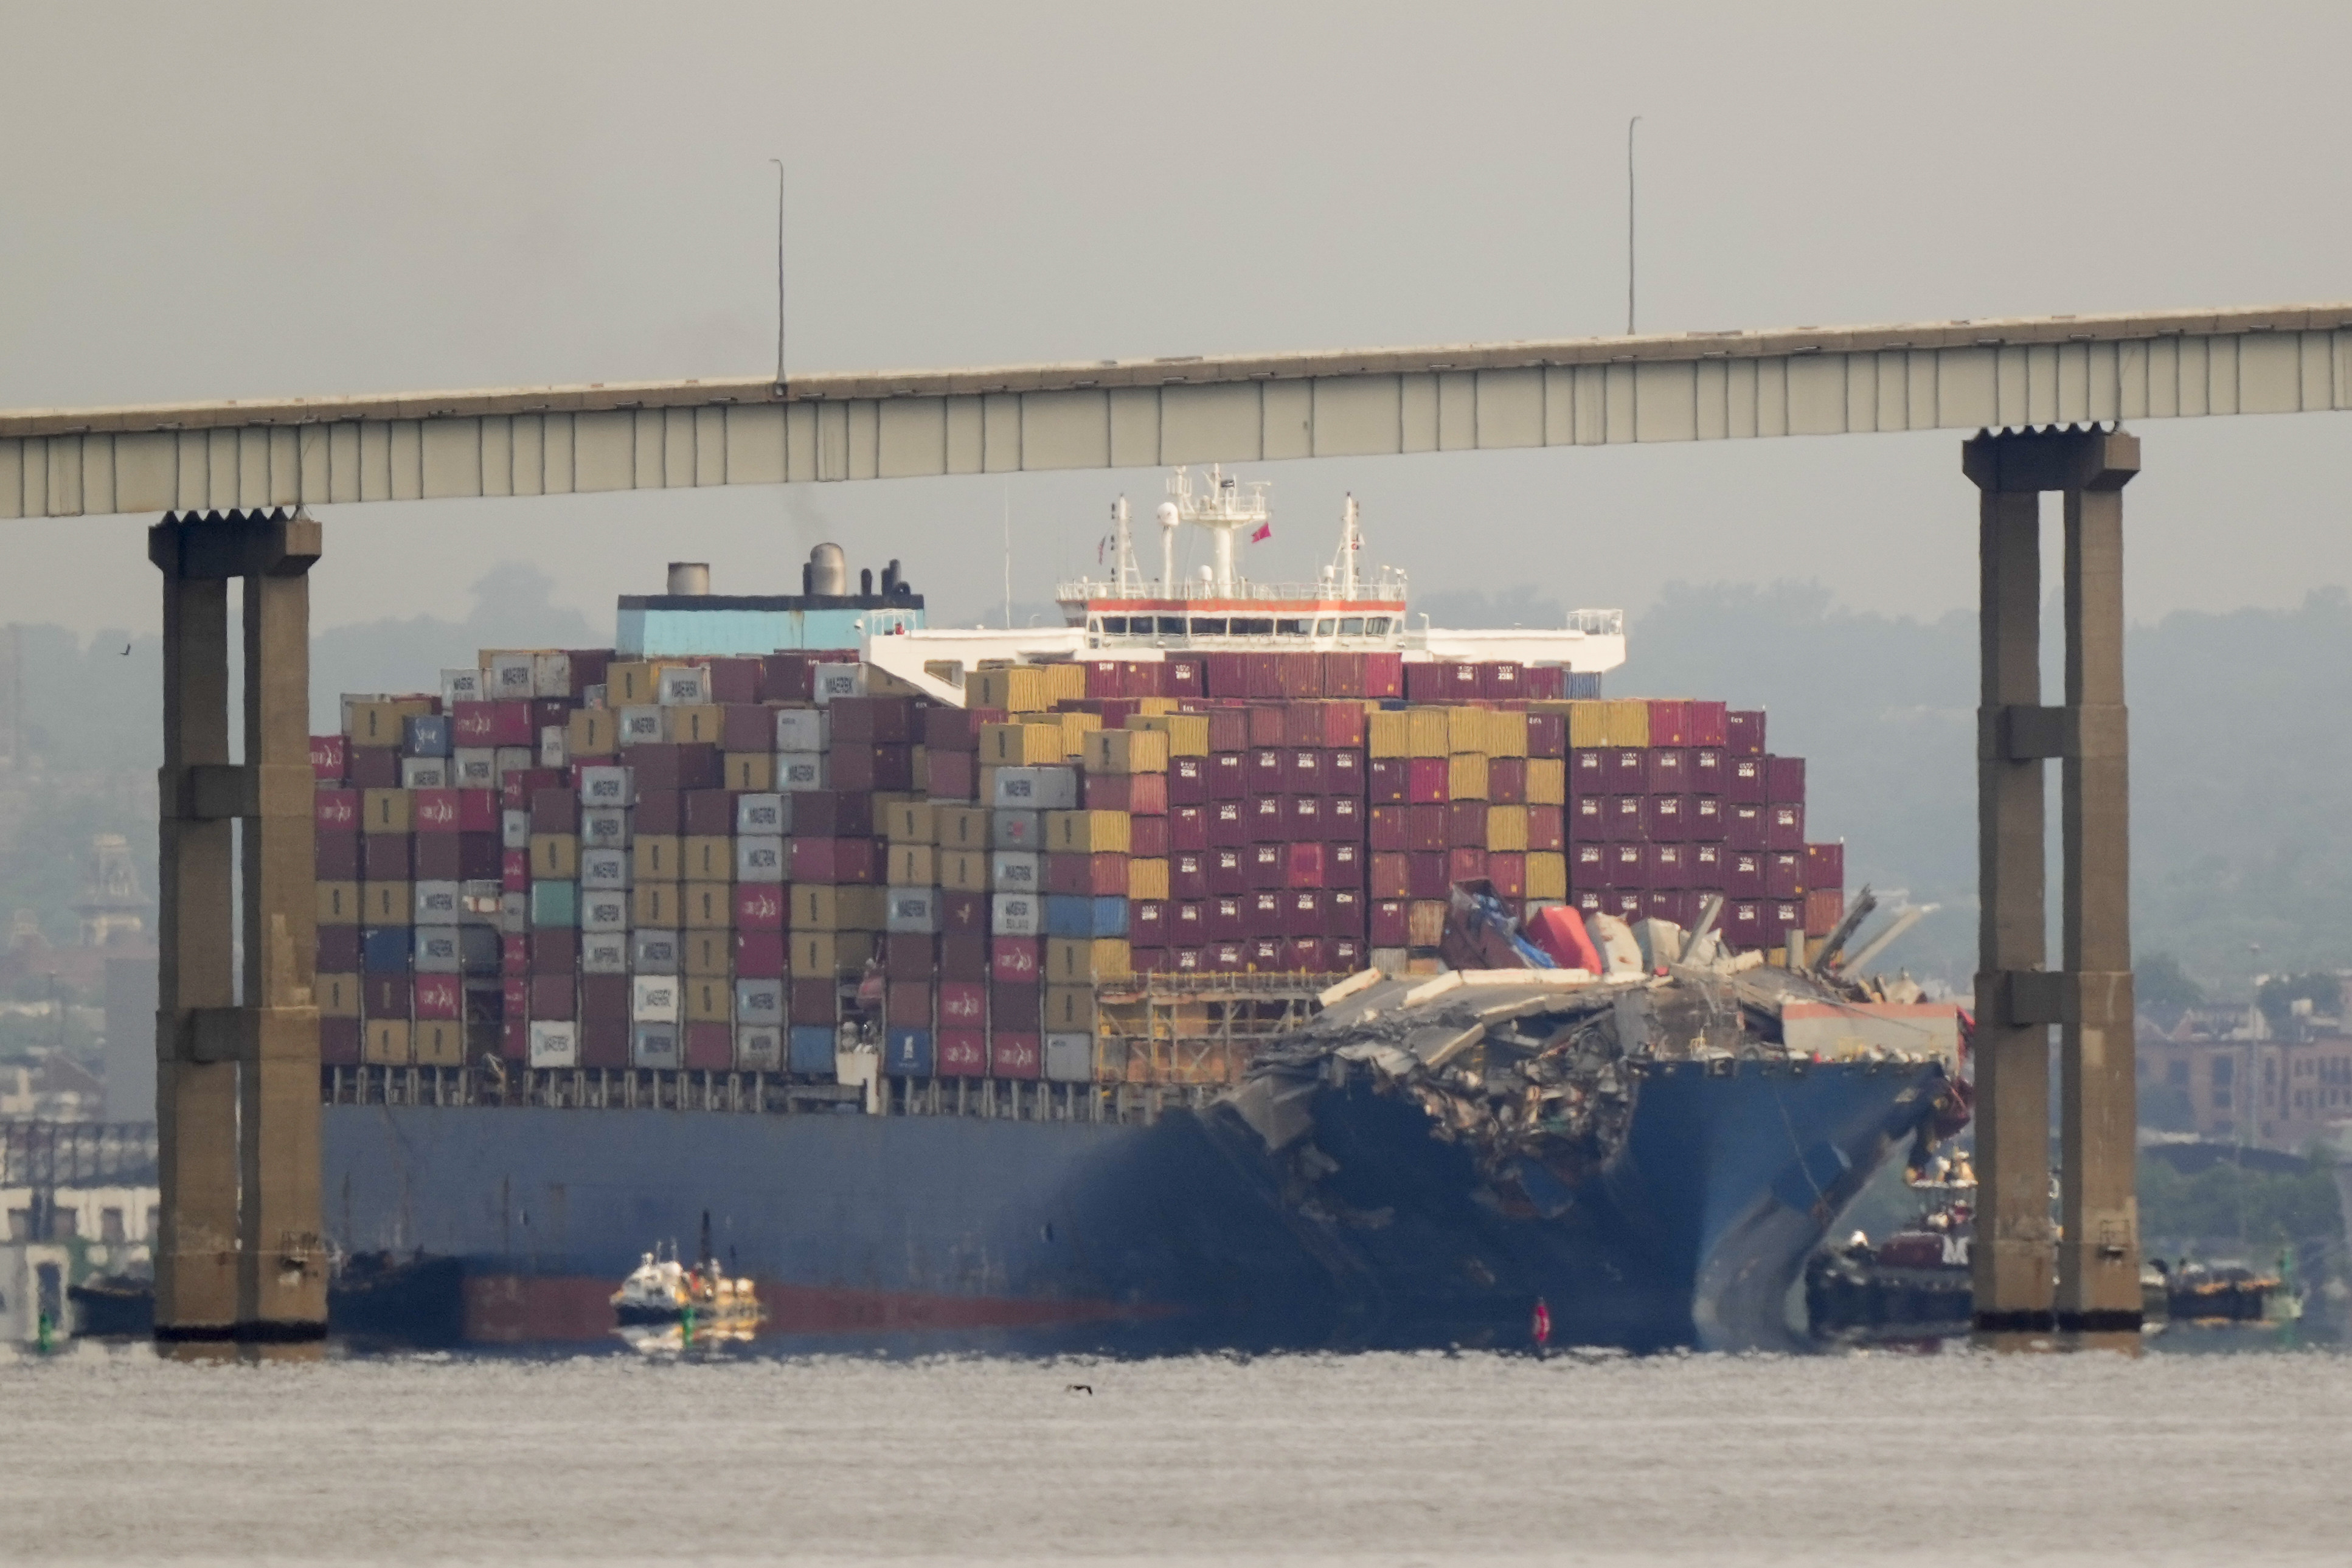 Tugboats escort the cargo ship Dali after it was refloated in Baltimore on Monday. Photo: AP